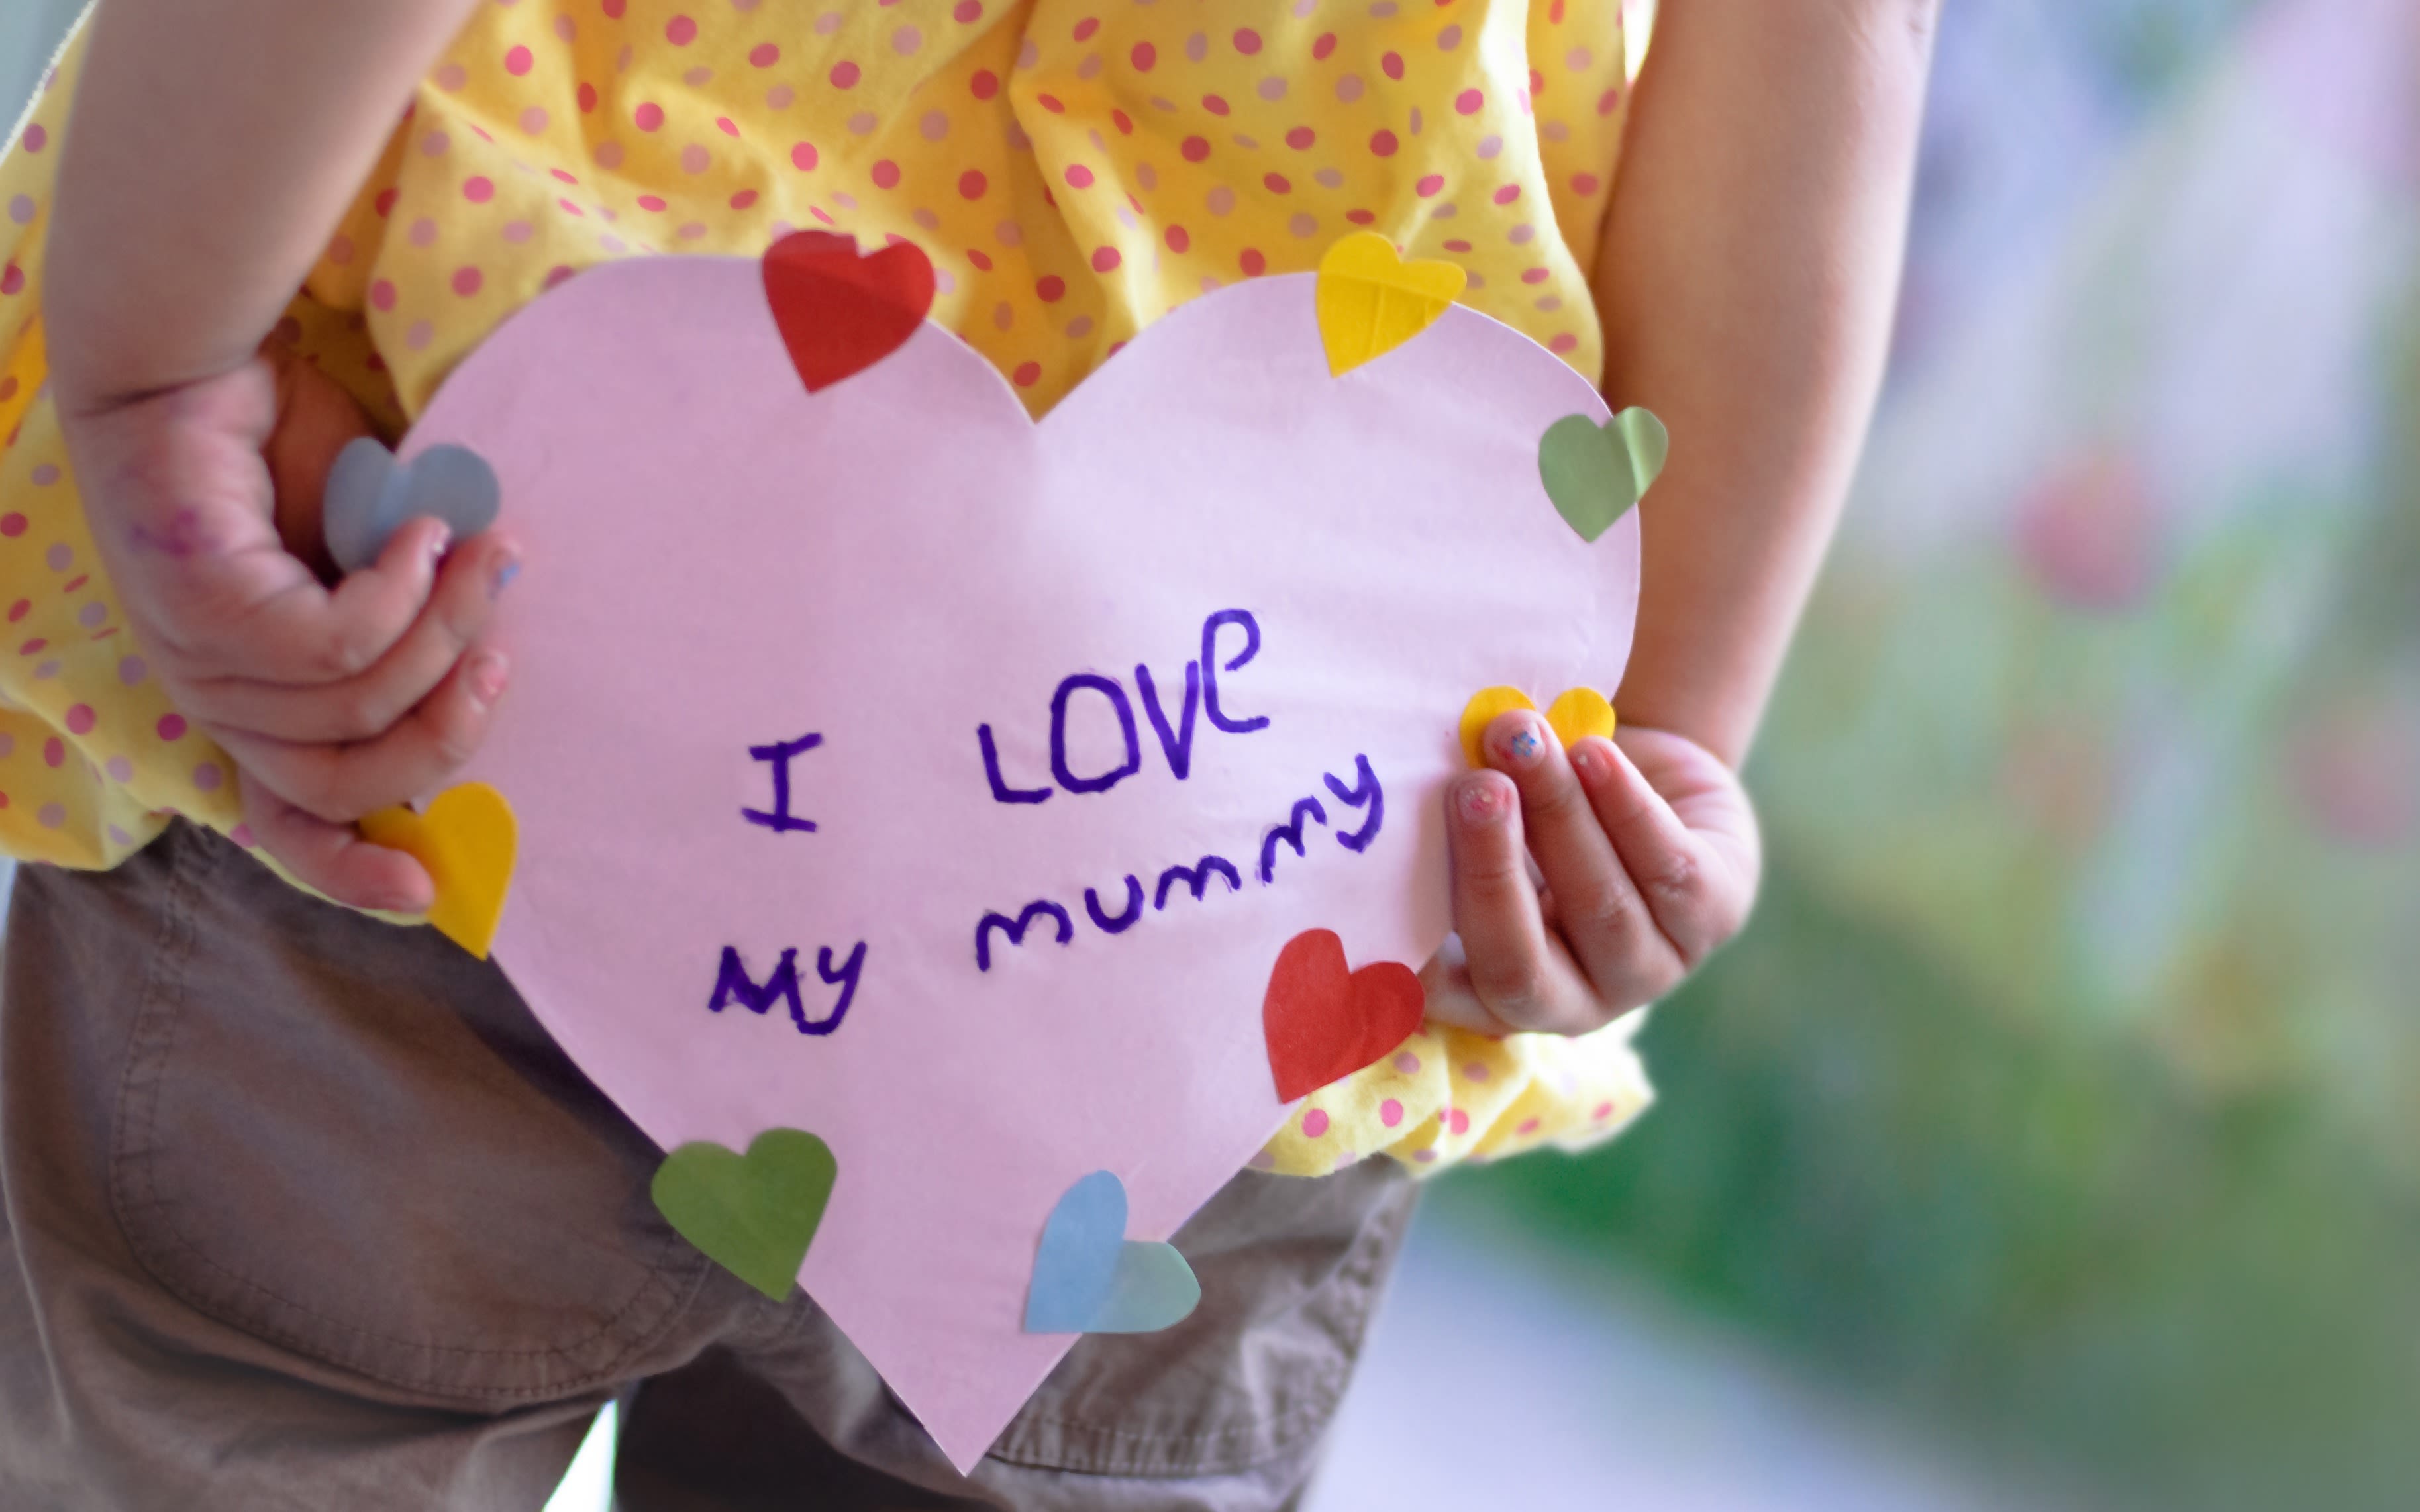 A child holding a heart-shaped sign that reads "I love my mummy" behind their back